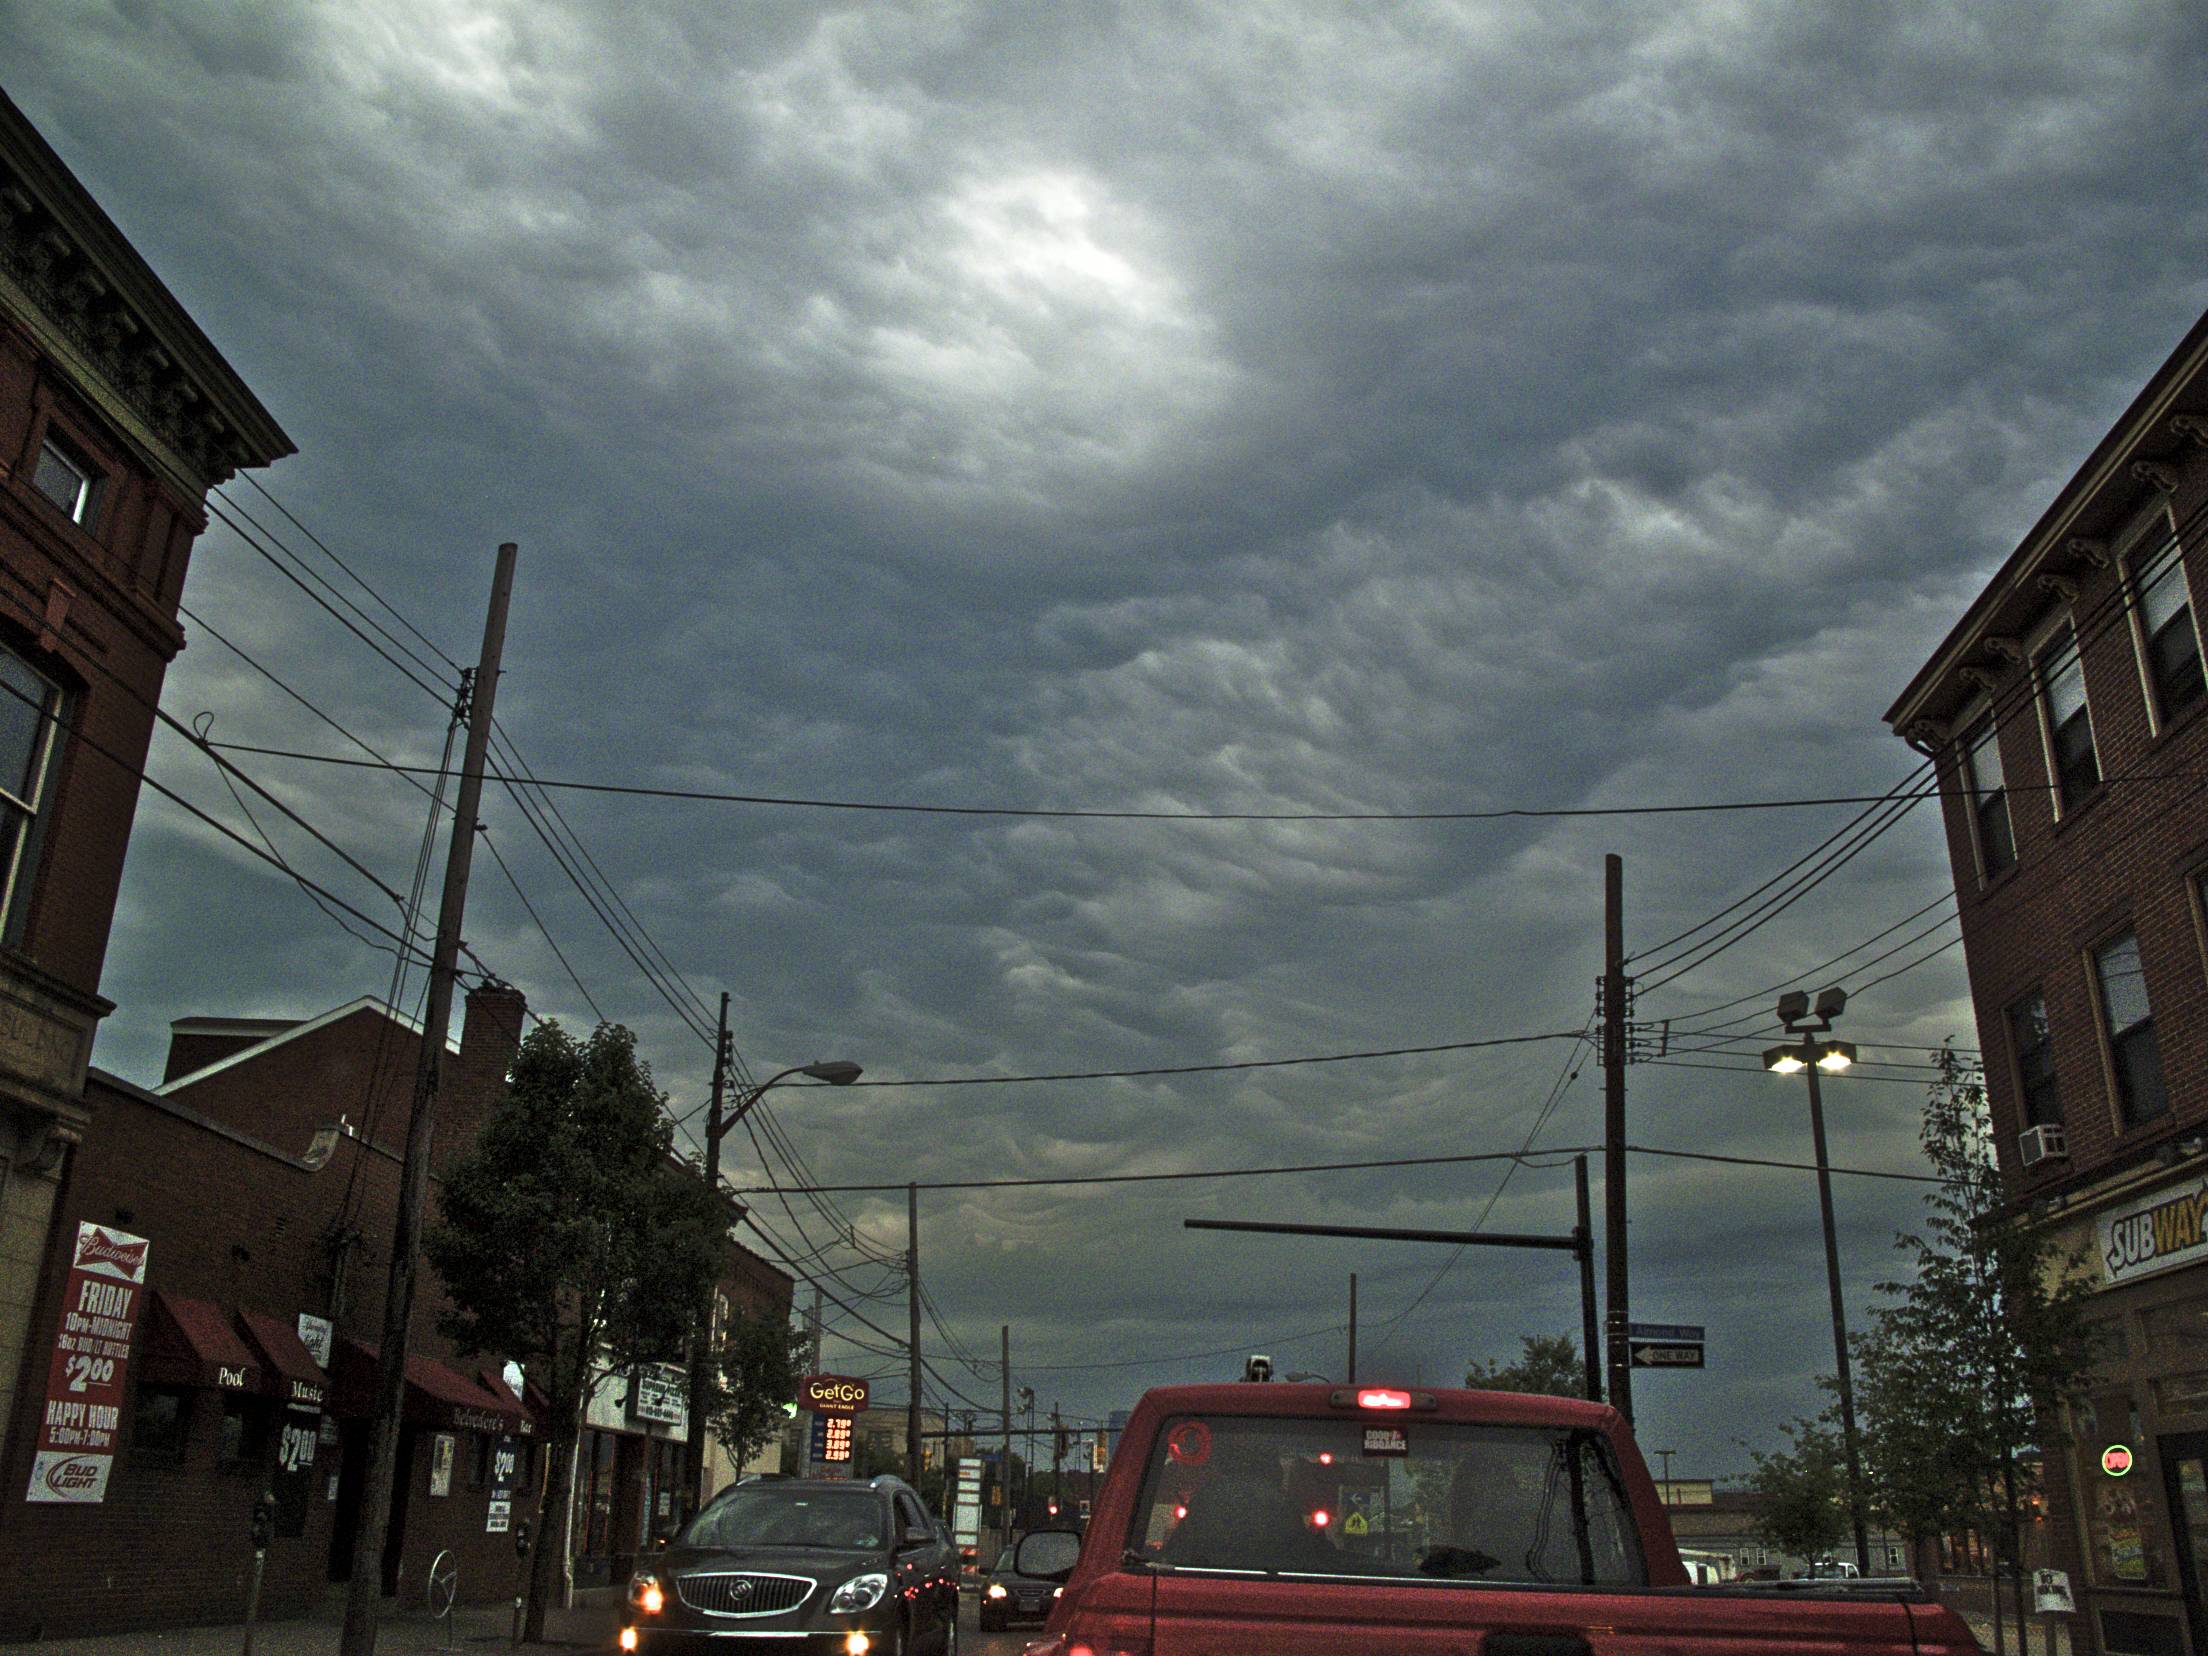 Pgh Clouds: Penn Ave in Lawrenceville